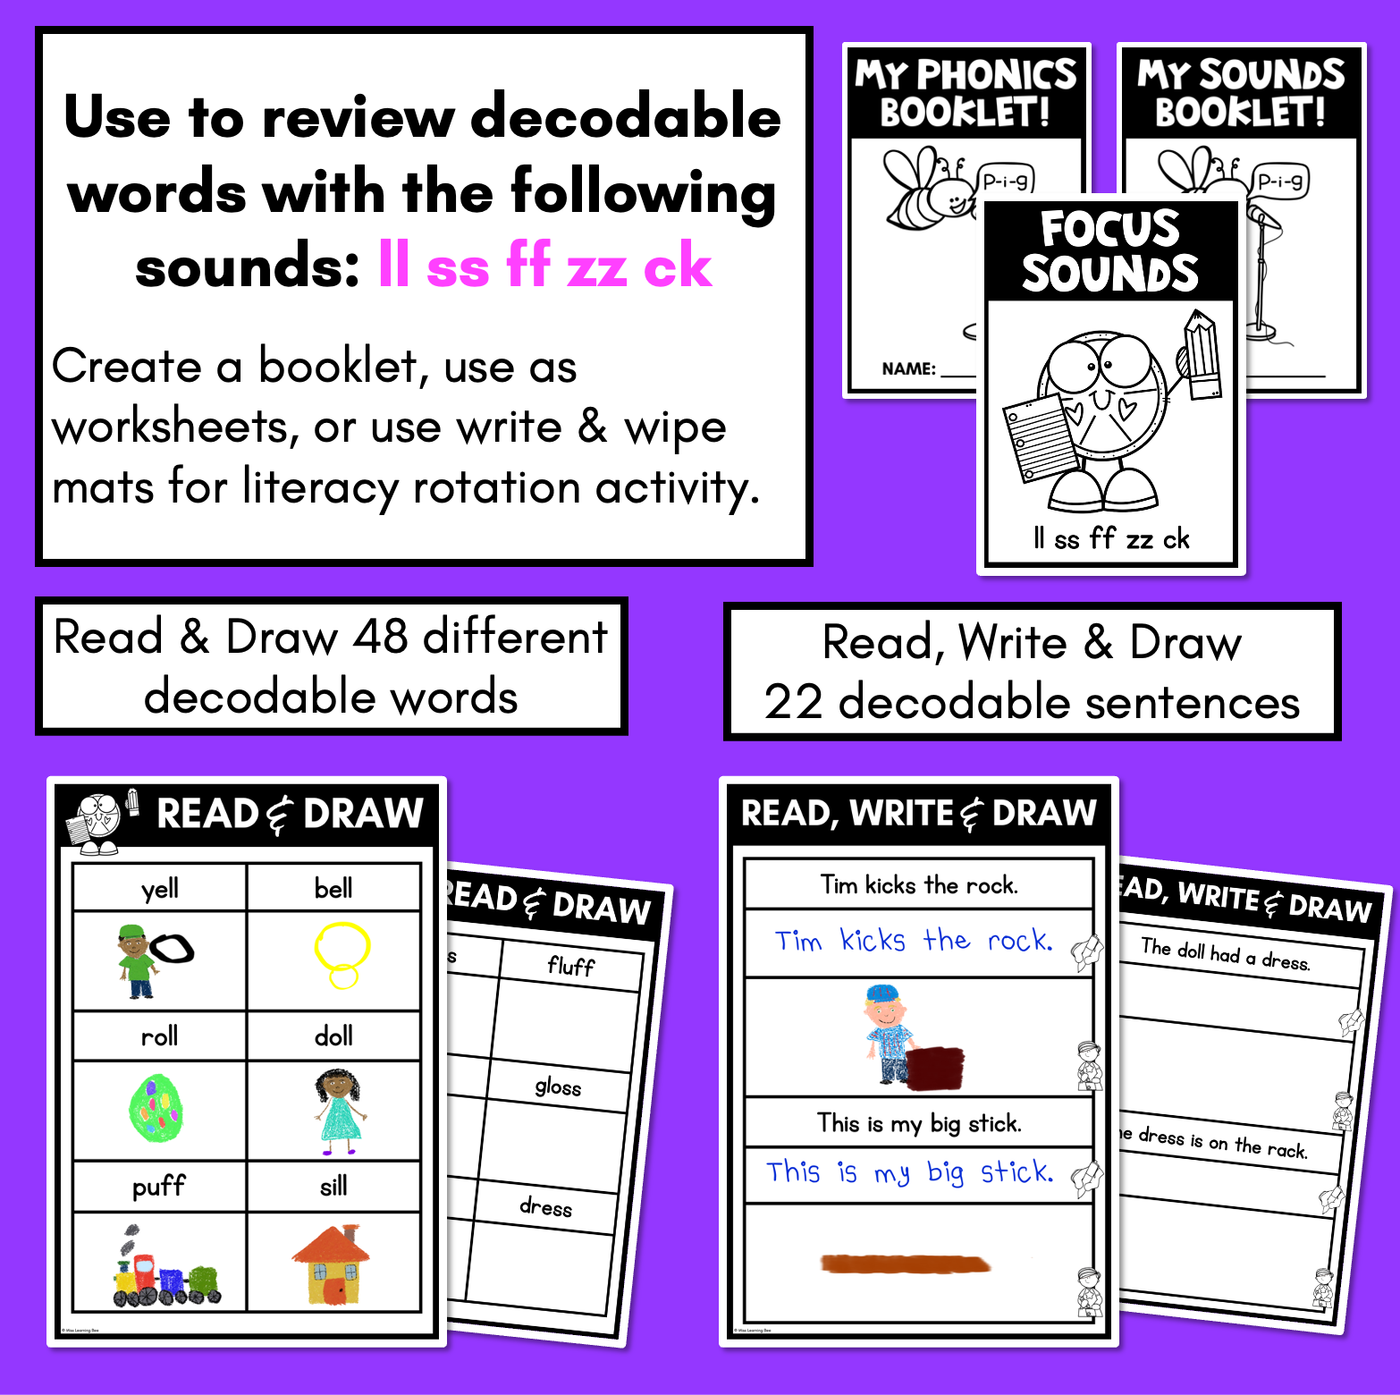 LL SS FF ZZ CK Worksheets - PHONICS REVIEW for Consonant Digraphs